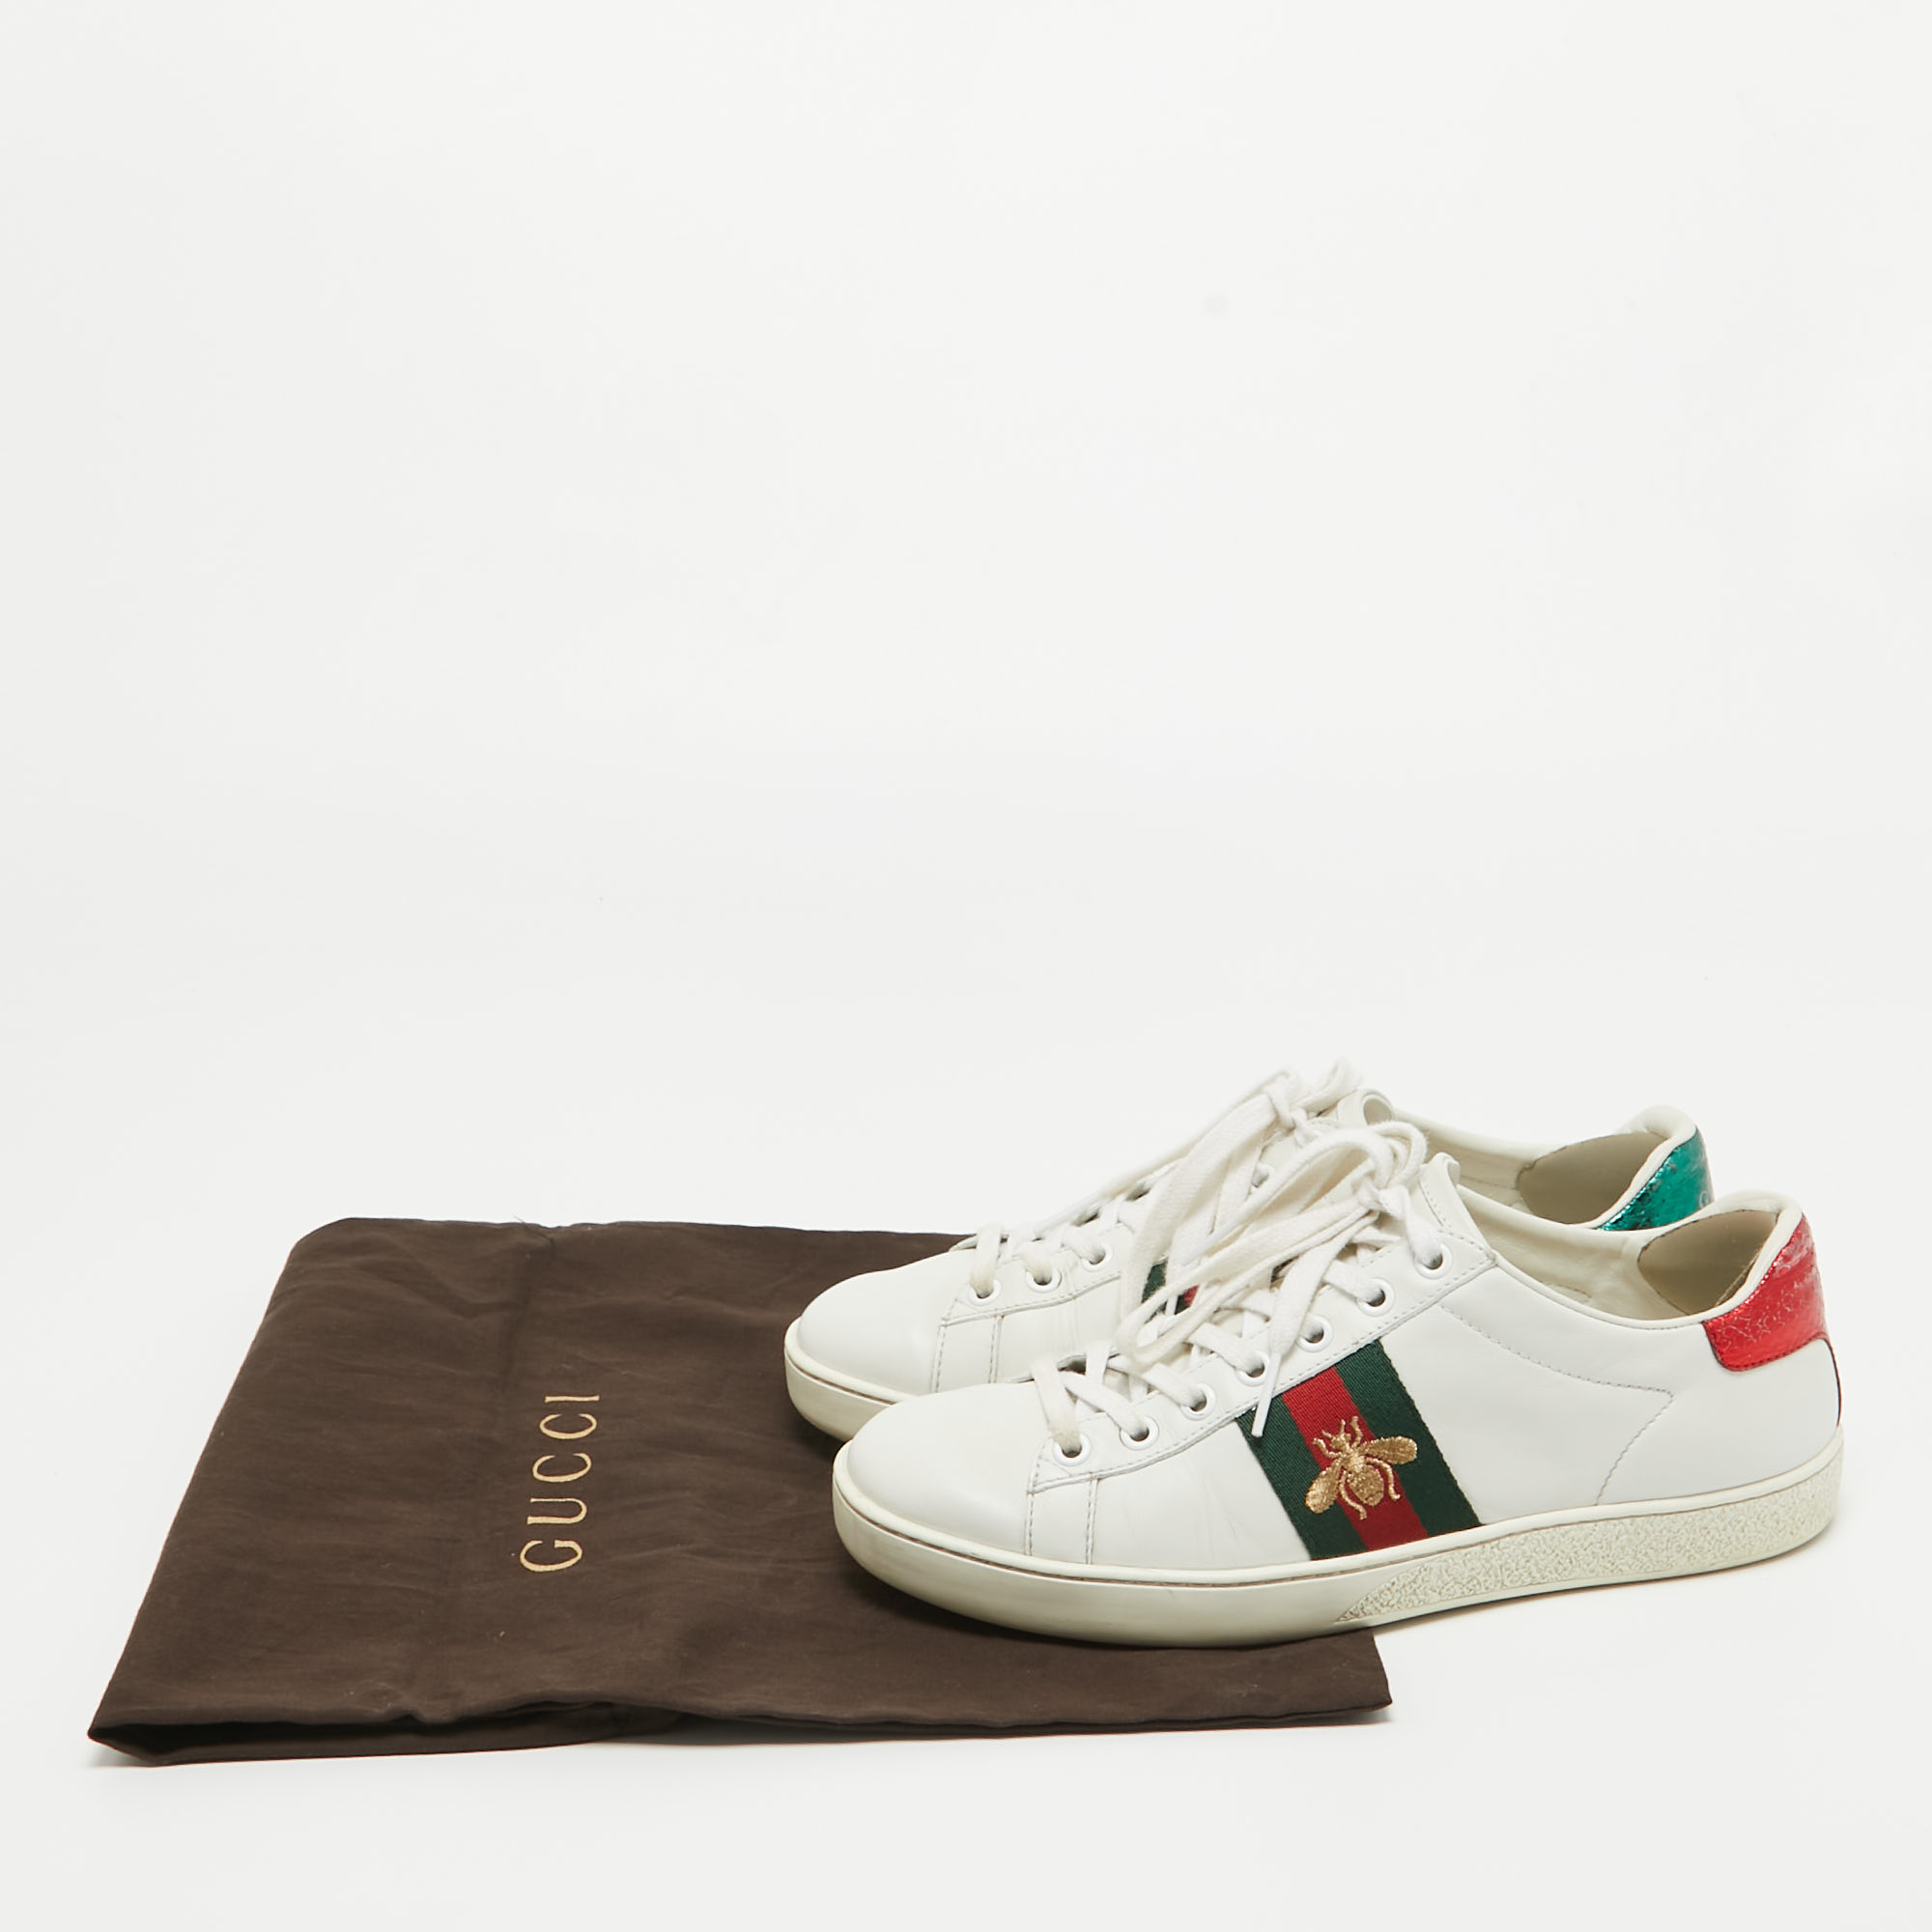 Gucci White Leather Ace Low Top Sneakers Size 37